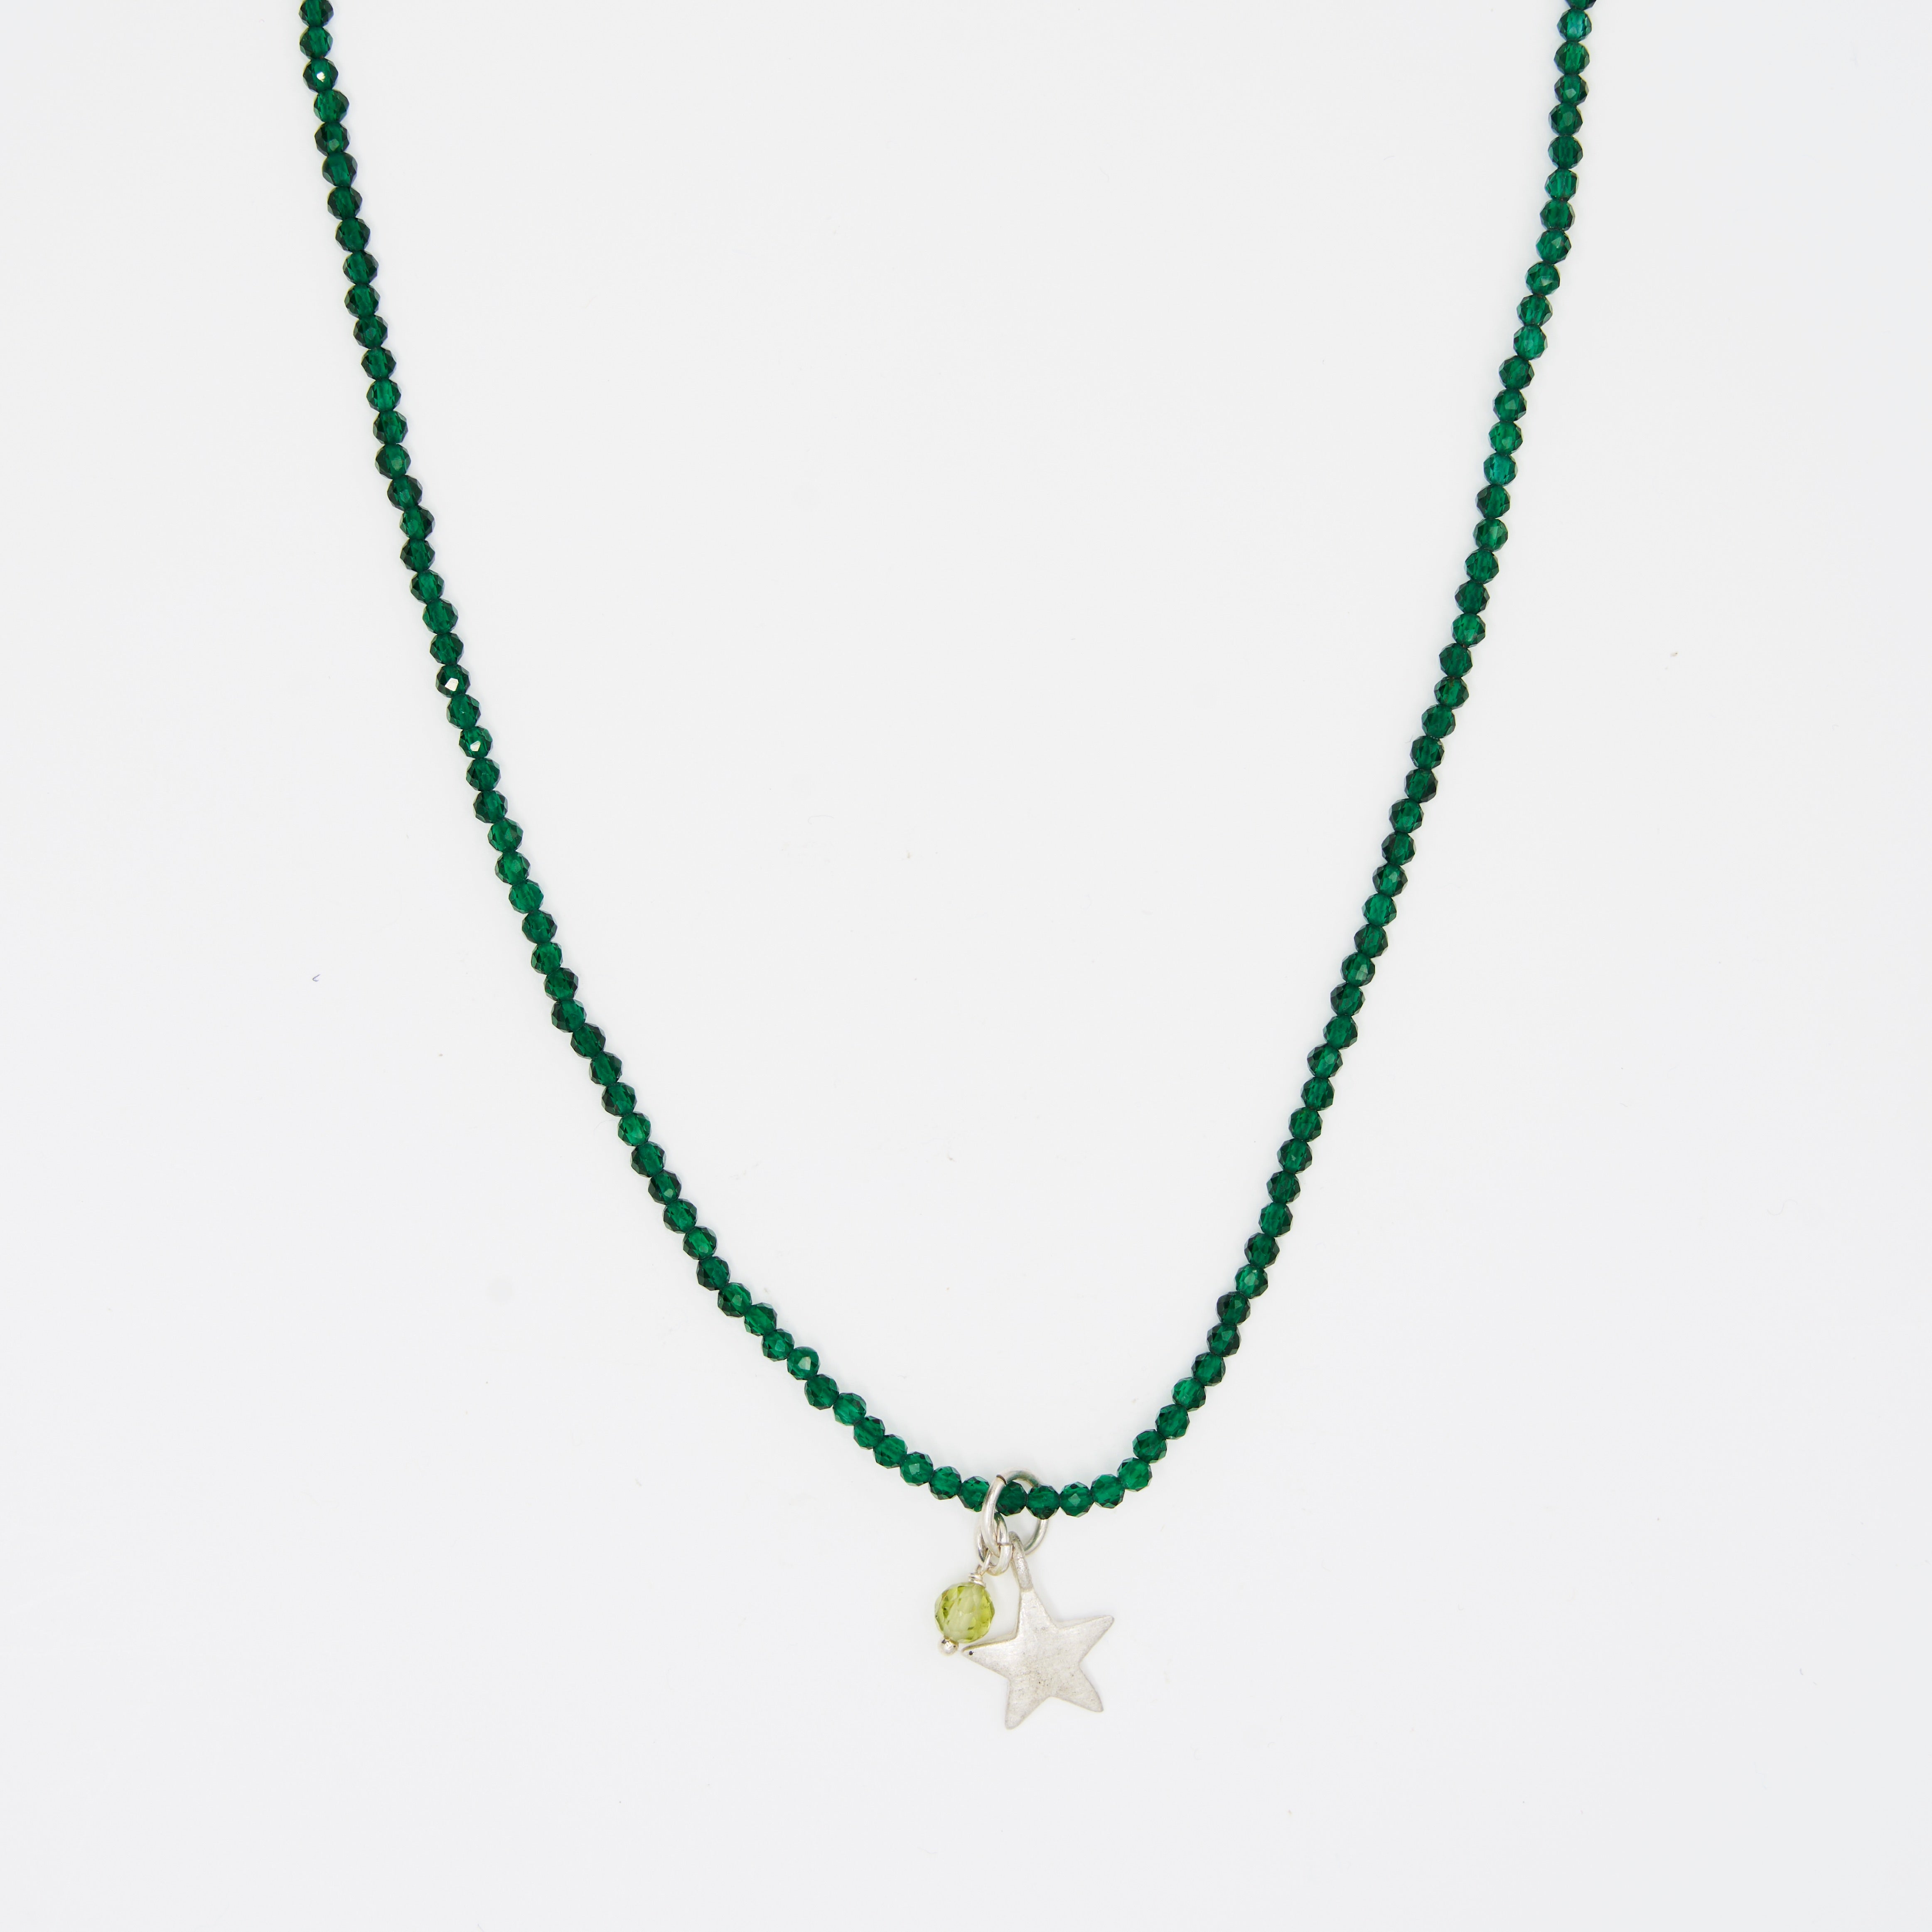 GREEN ONYX STAR NECKLACE